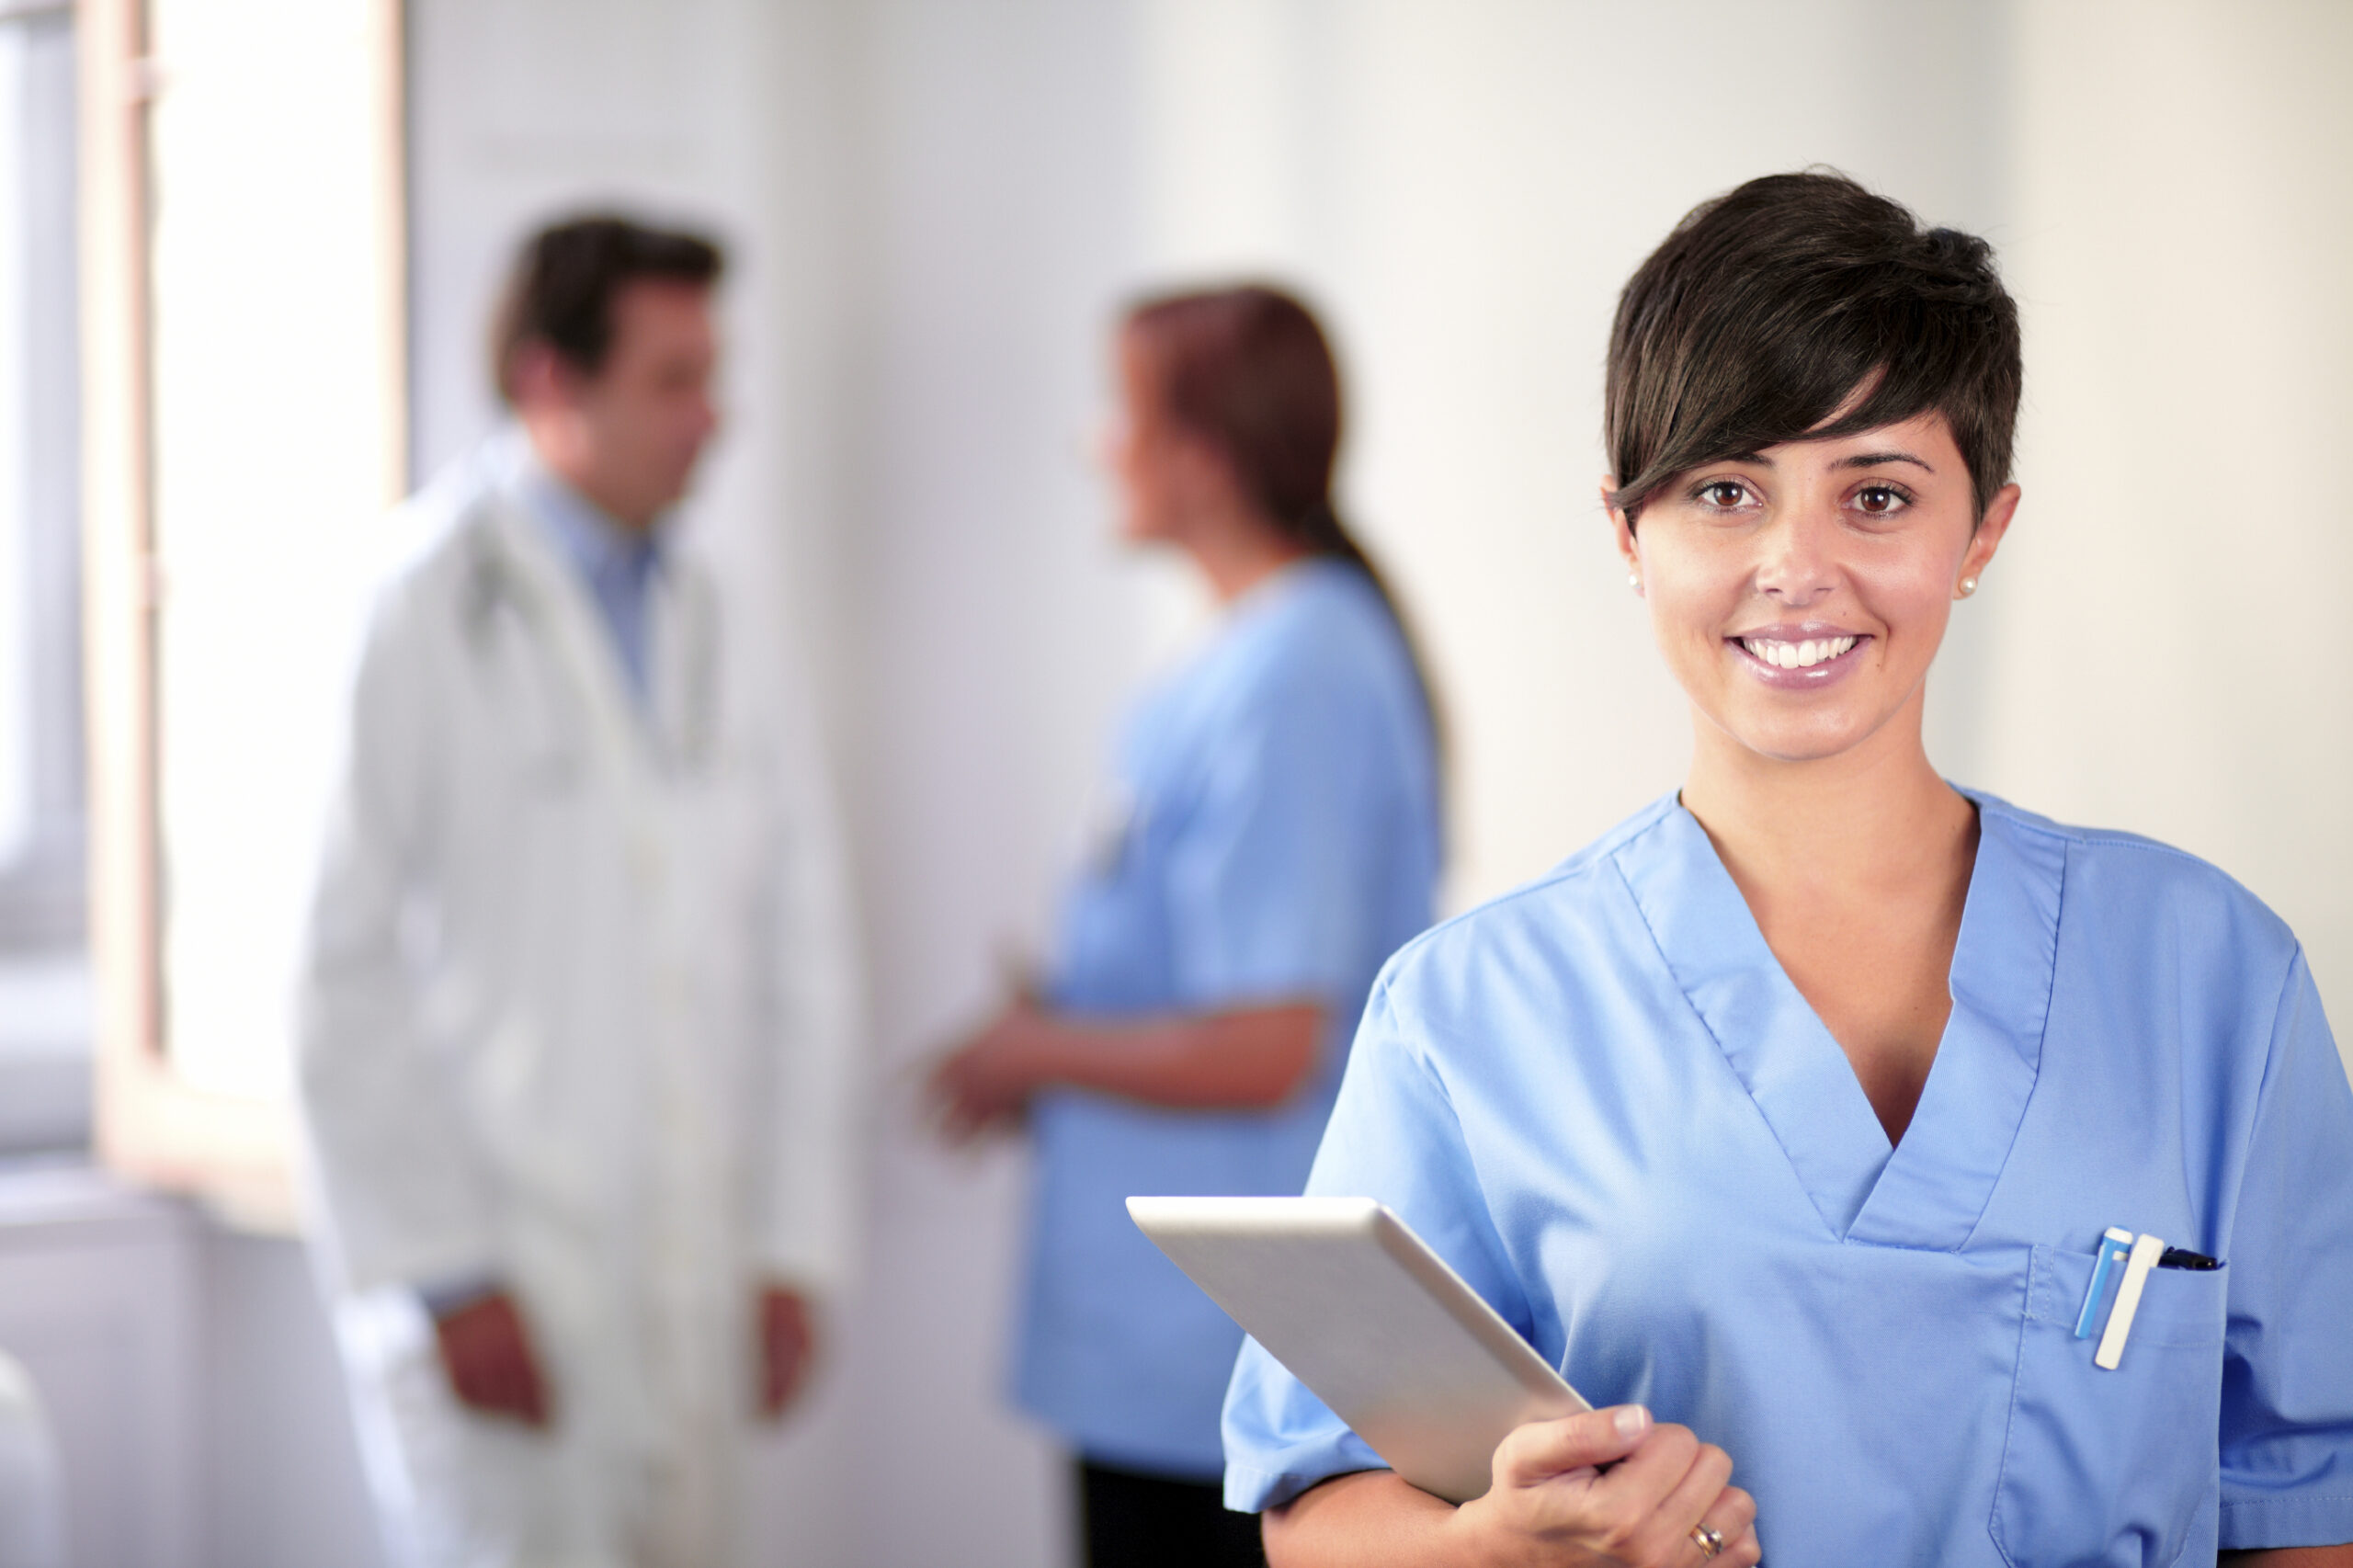 <p>If you’ve ever thought about a nursing career, there are aspects of this educational path that you may not have considered. Hear from Noodle Expert Joan Spitrey about the tips she wishes she’d gotten before enrolling in nursing school.</p>